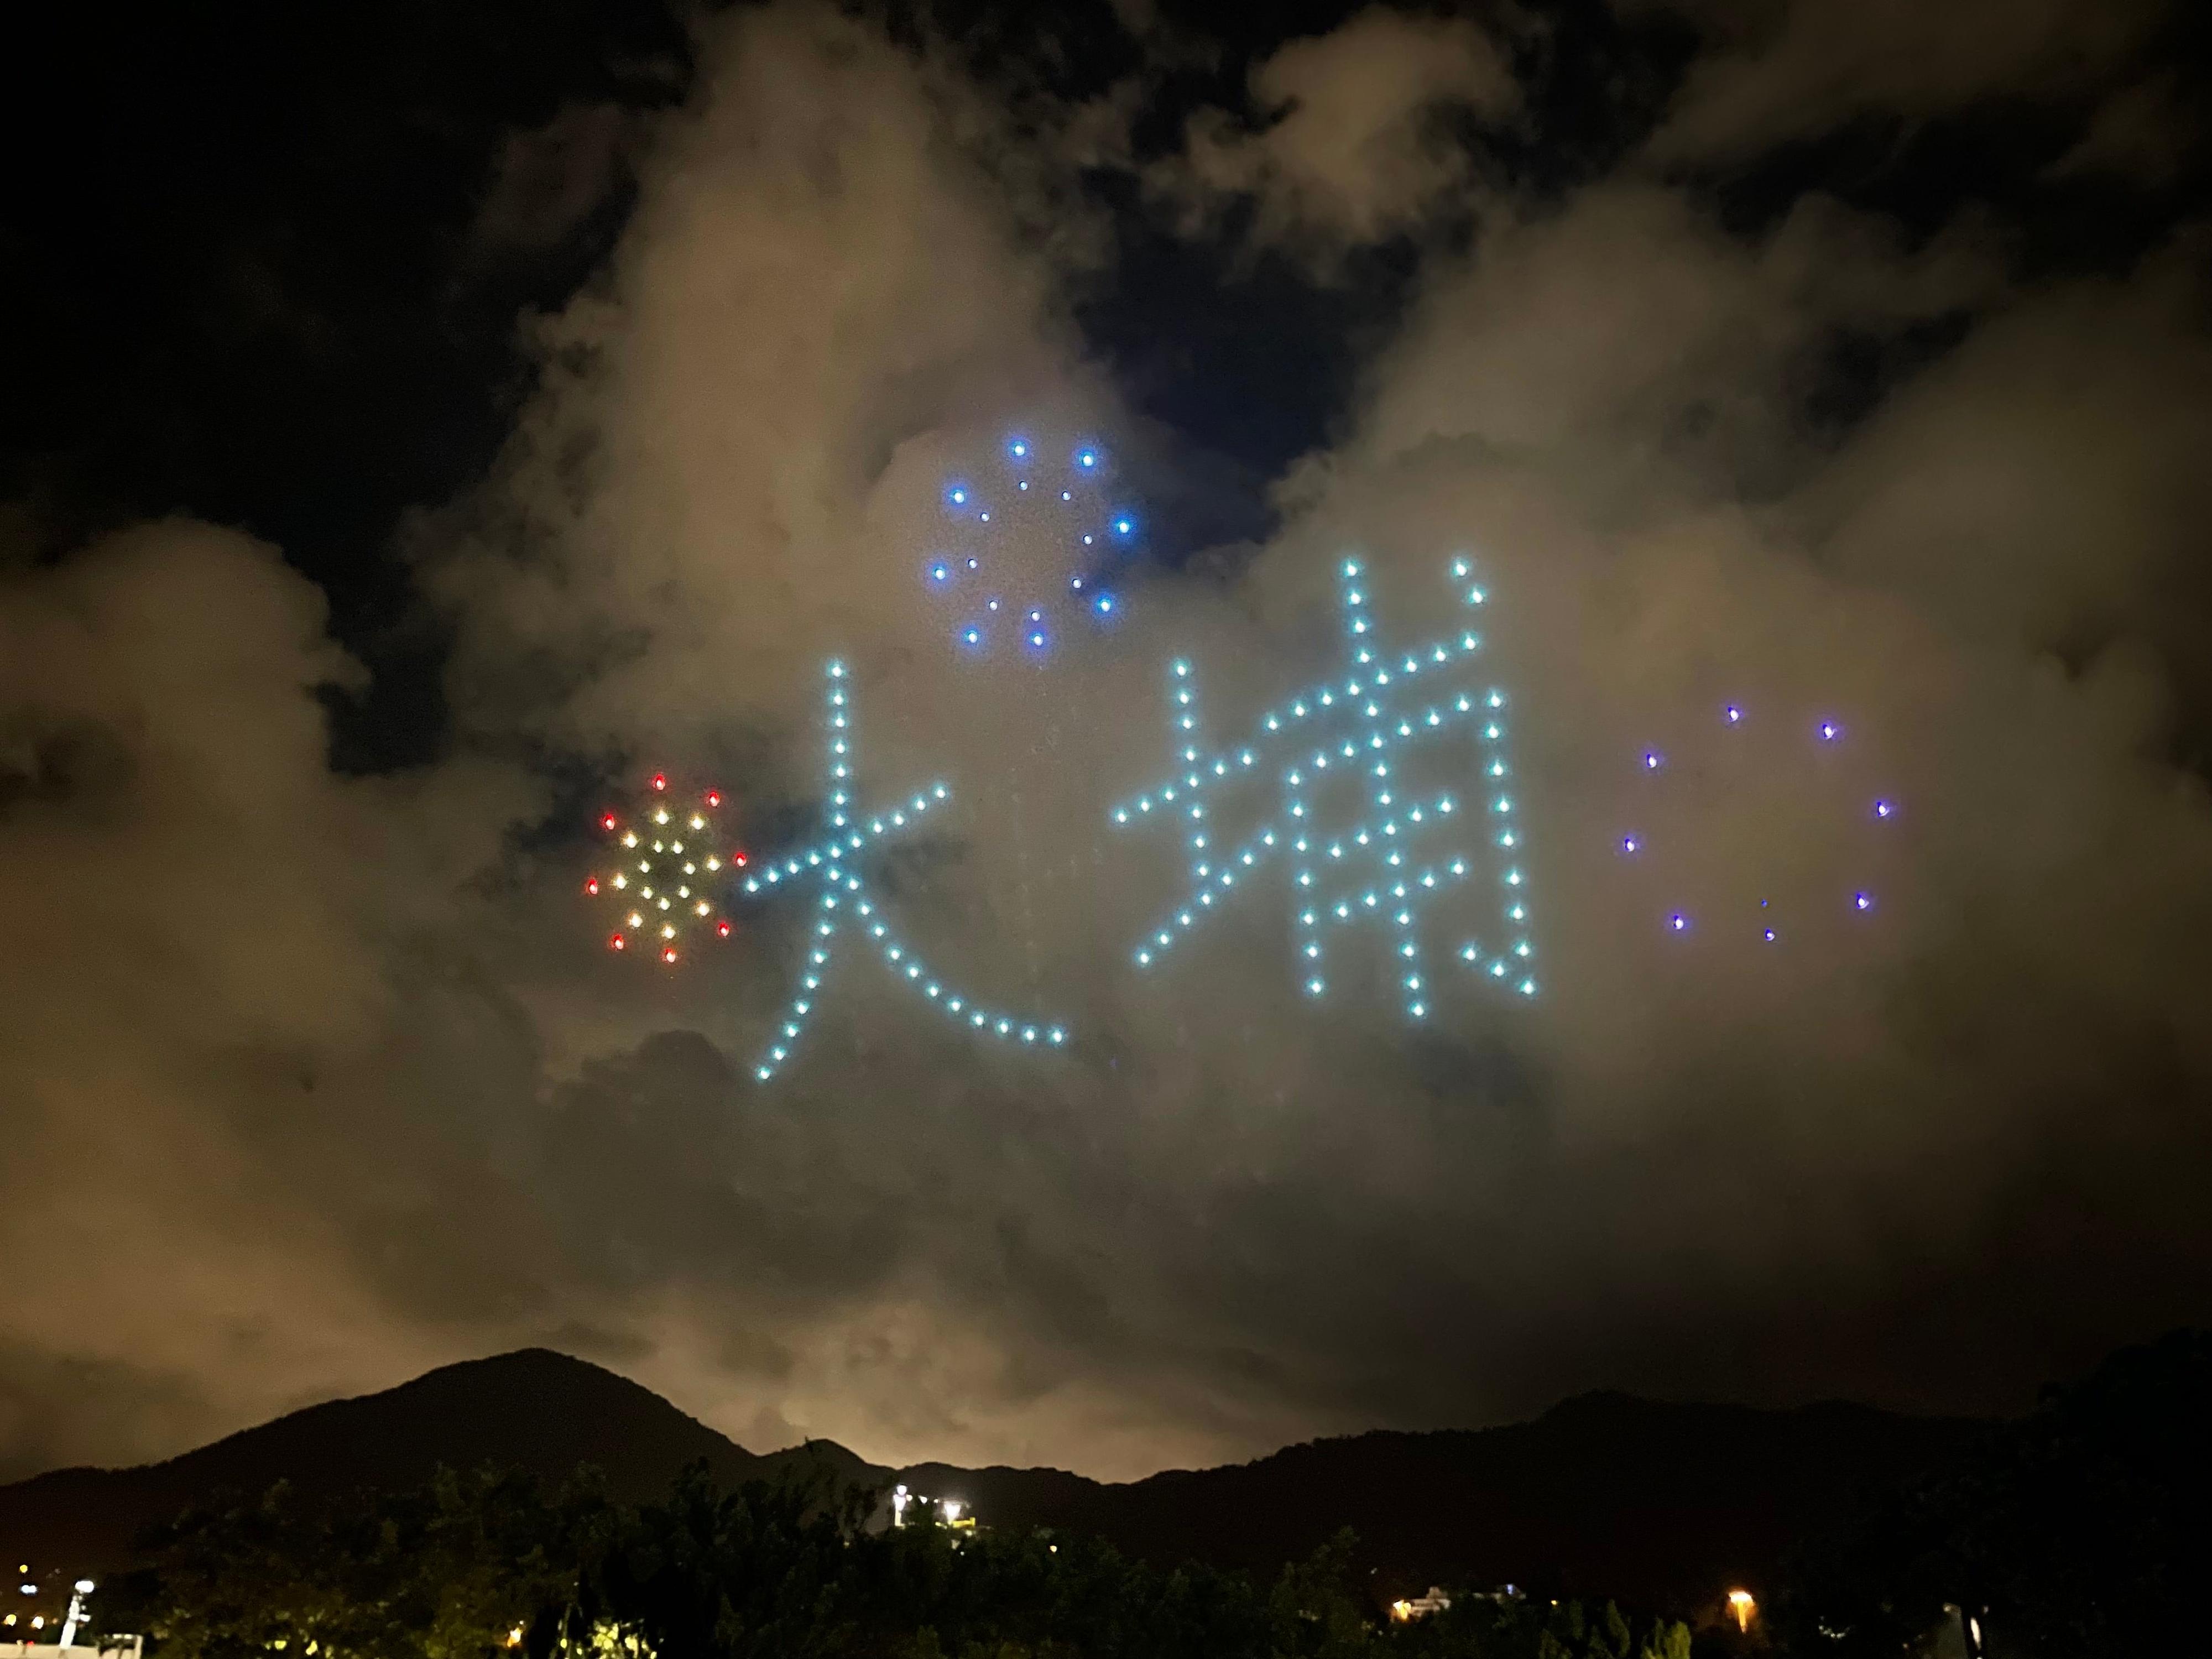 The Tai Po District Office and the Tai Po District Preparatory Committee for Activities to Celebrate the 25th Anniversary of the Establishment of the Hong Kong Special Administrative Region yesterday (July 3) organised a parade with the elements of sea, land and sky at the Tai Po Waterfront Park. Photo shows drones forming the words “Tai Po” over the sky above Tolo Harbour.